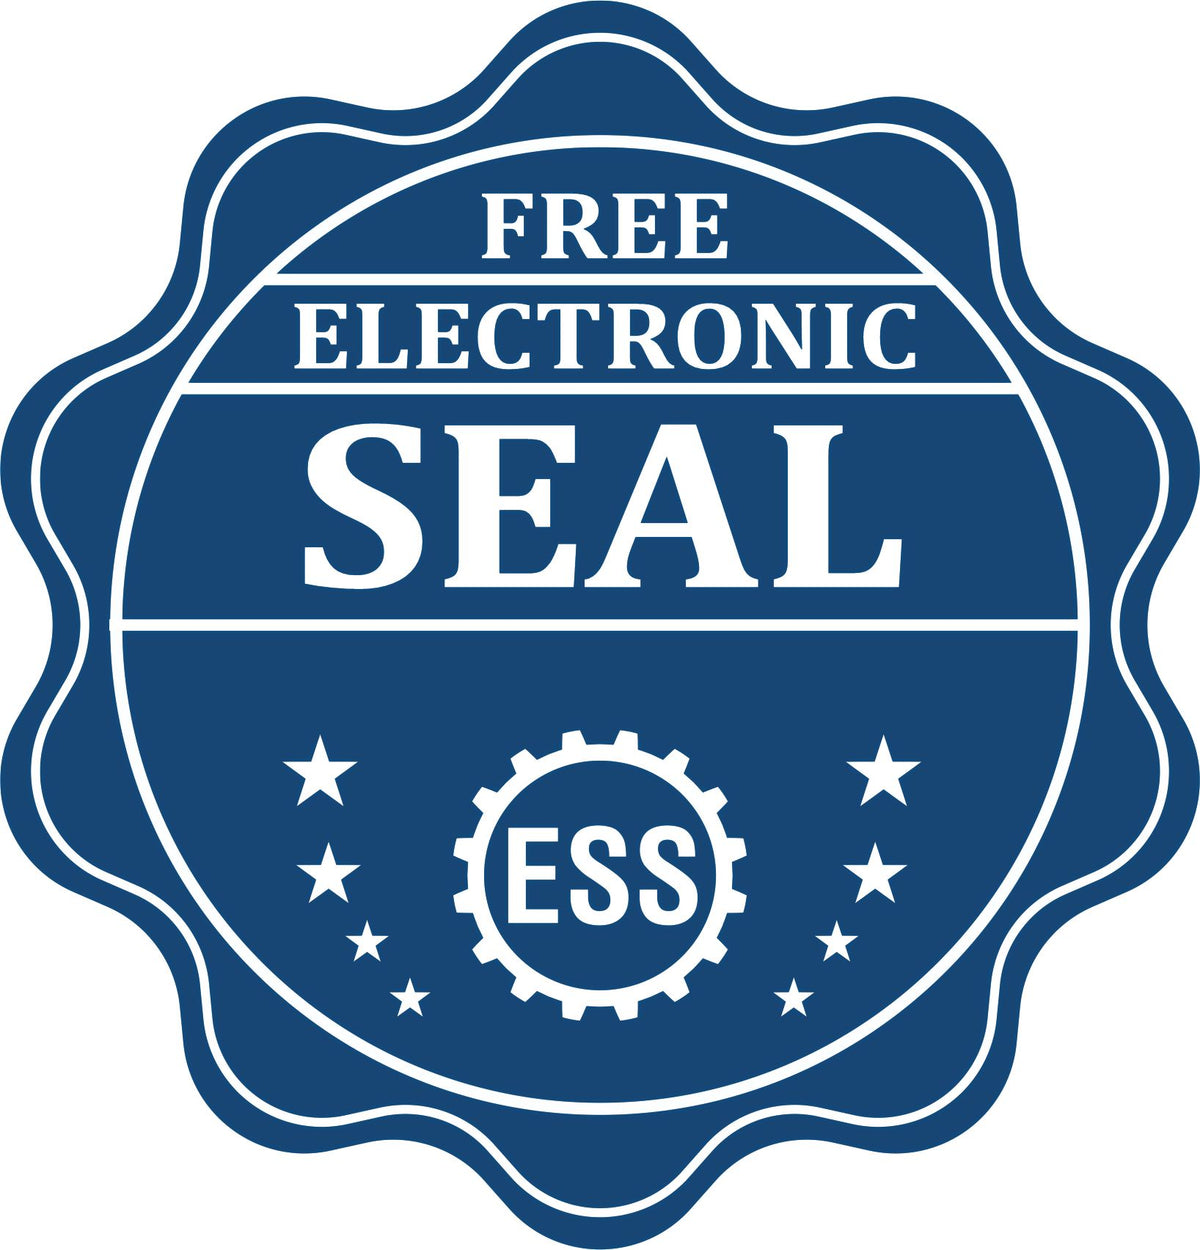 A badge showing a free electronic seal for the Long Reach Ohio Geology Seal with stars and the ESS gear on the emblem.